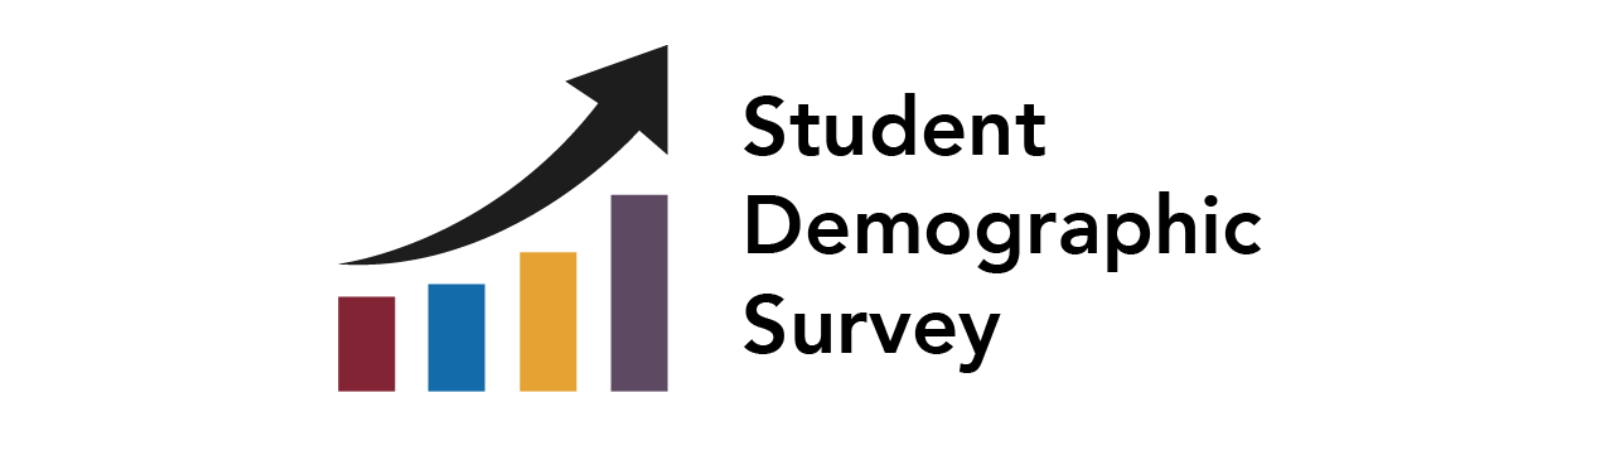 Student Demographic Survey with graph